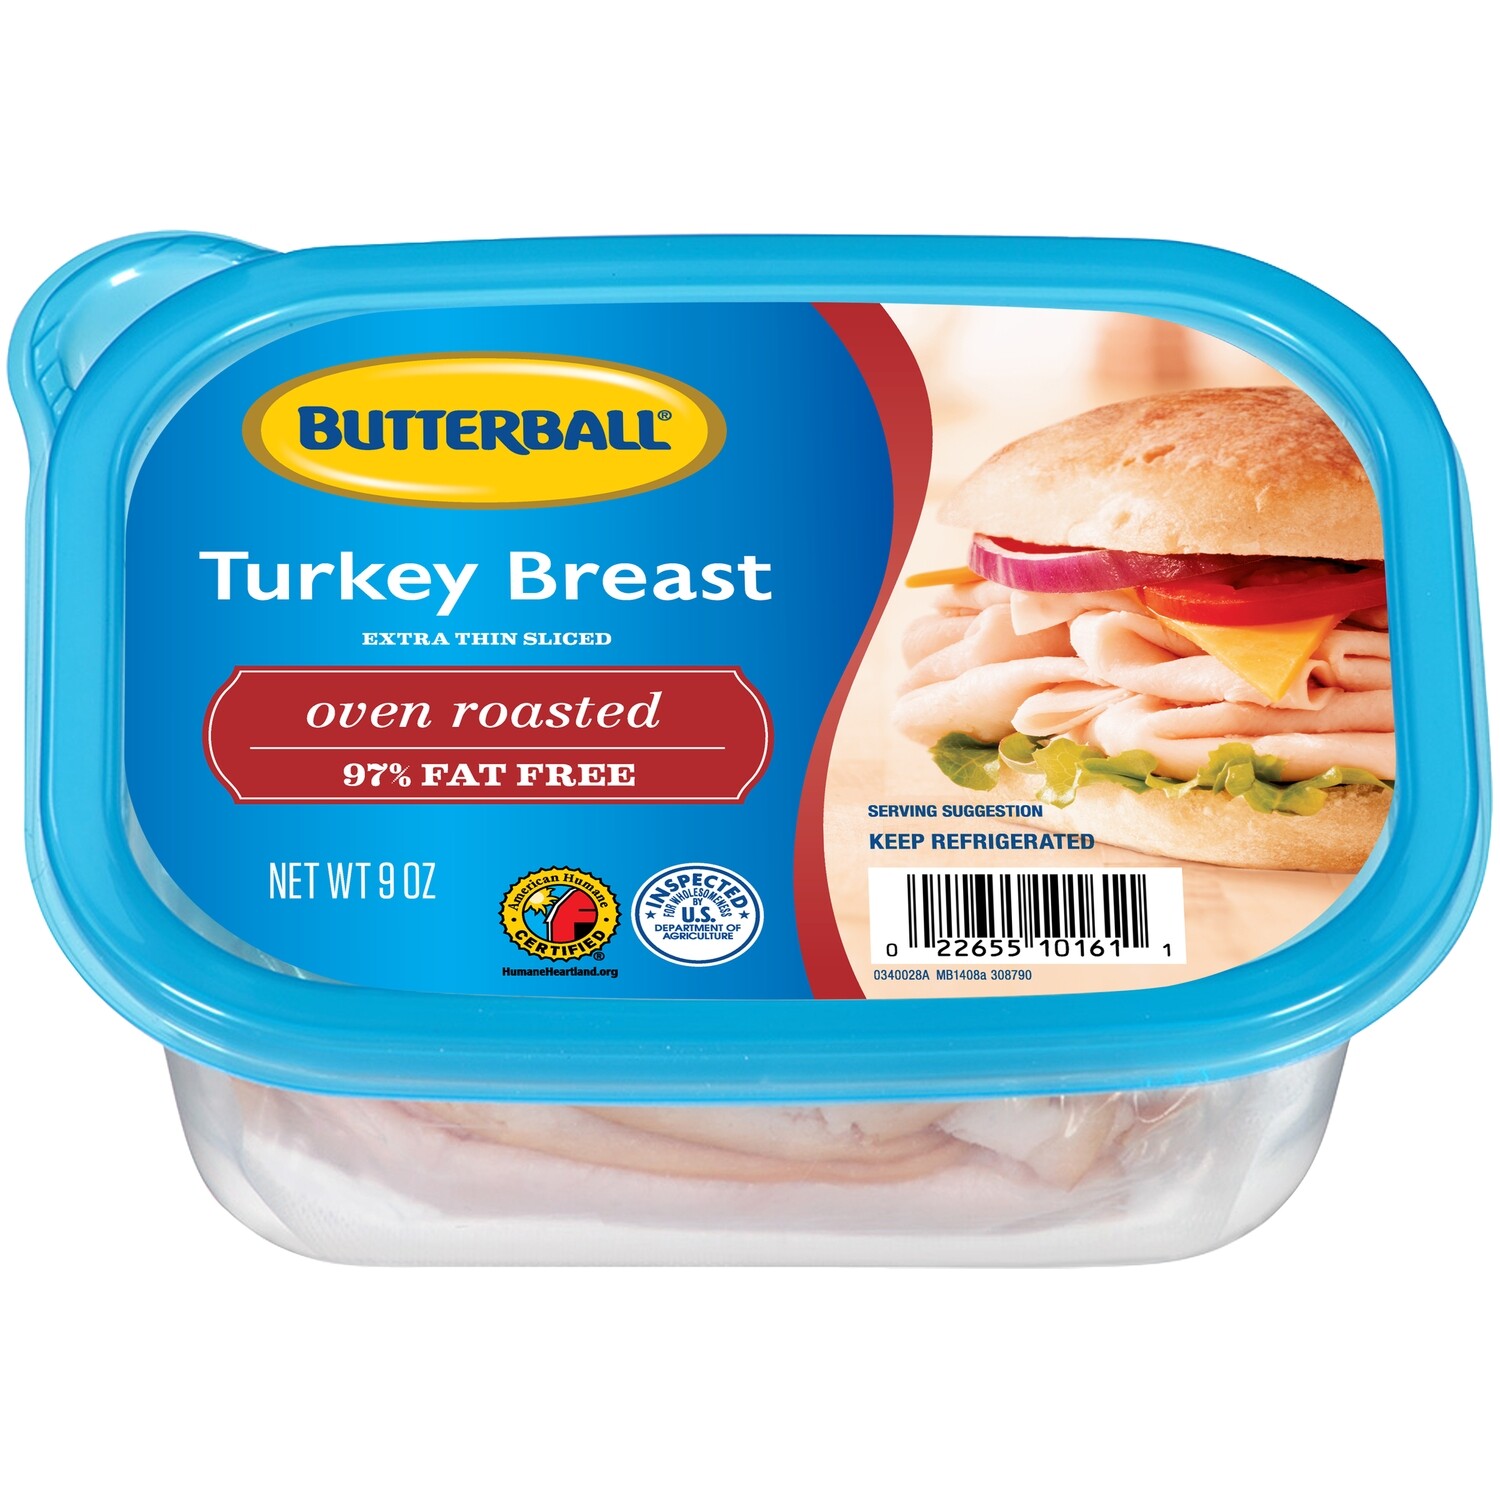 TURKEY BREAST OVEN ROASTED BUTTERBALL